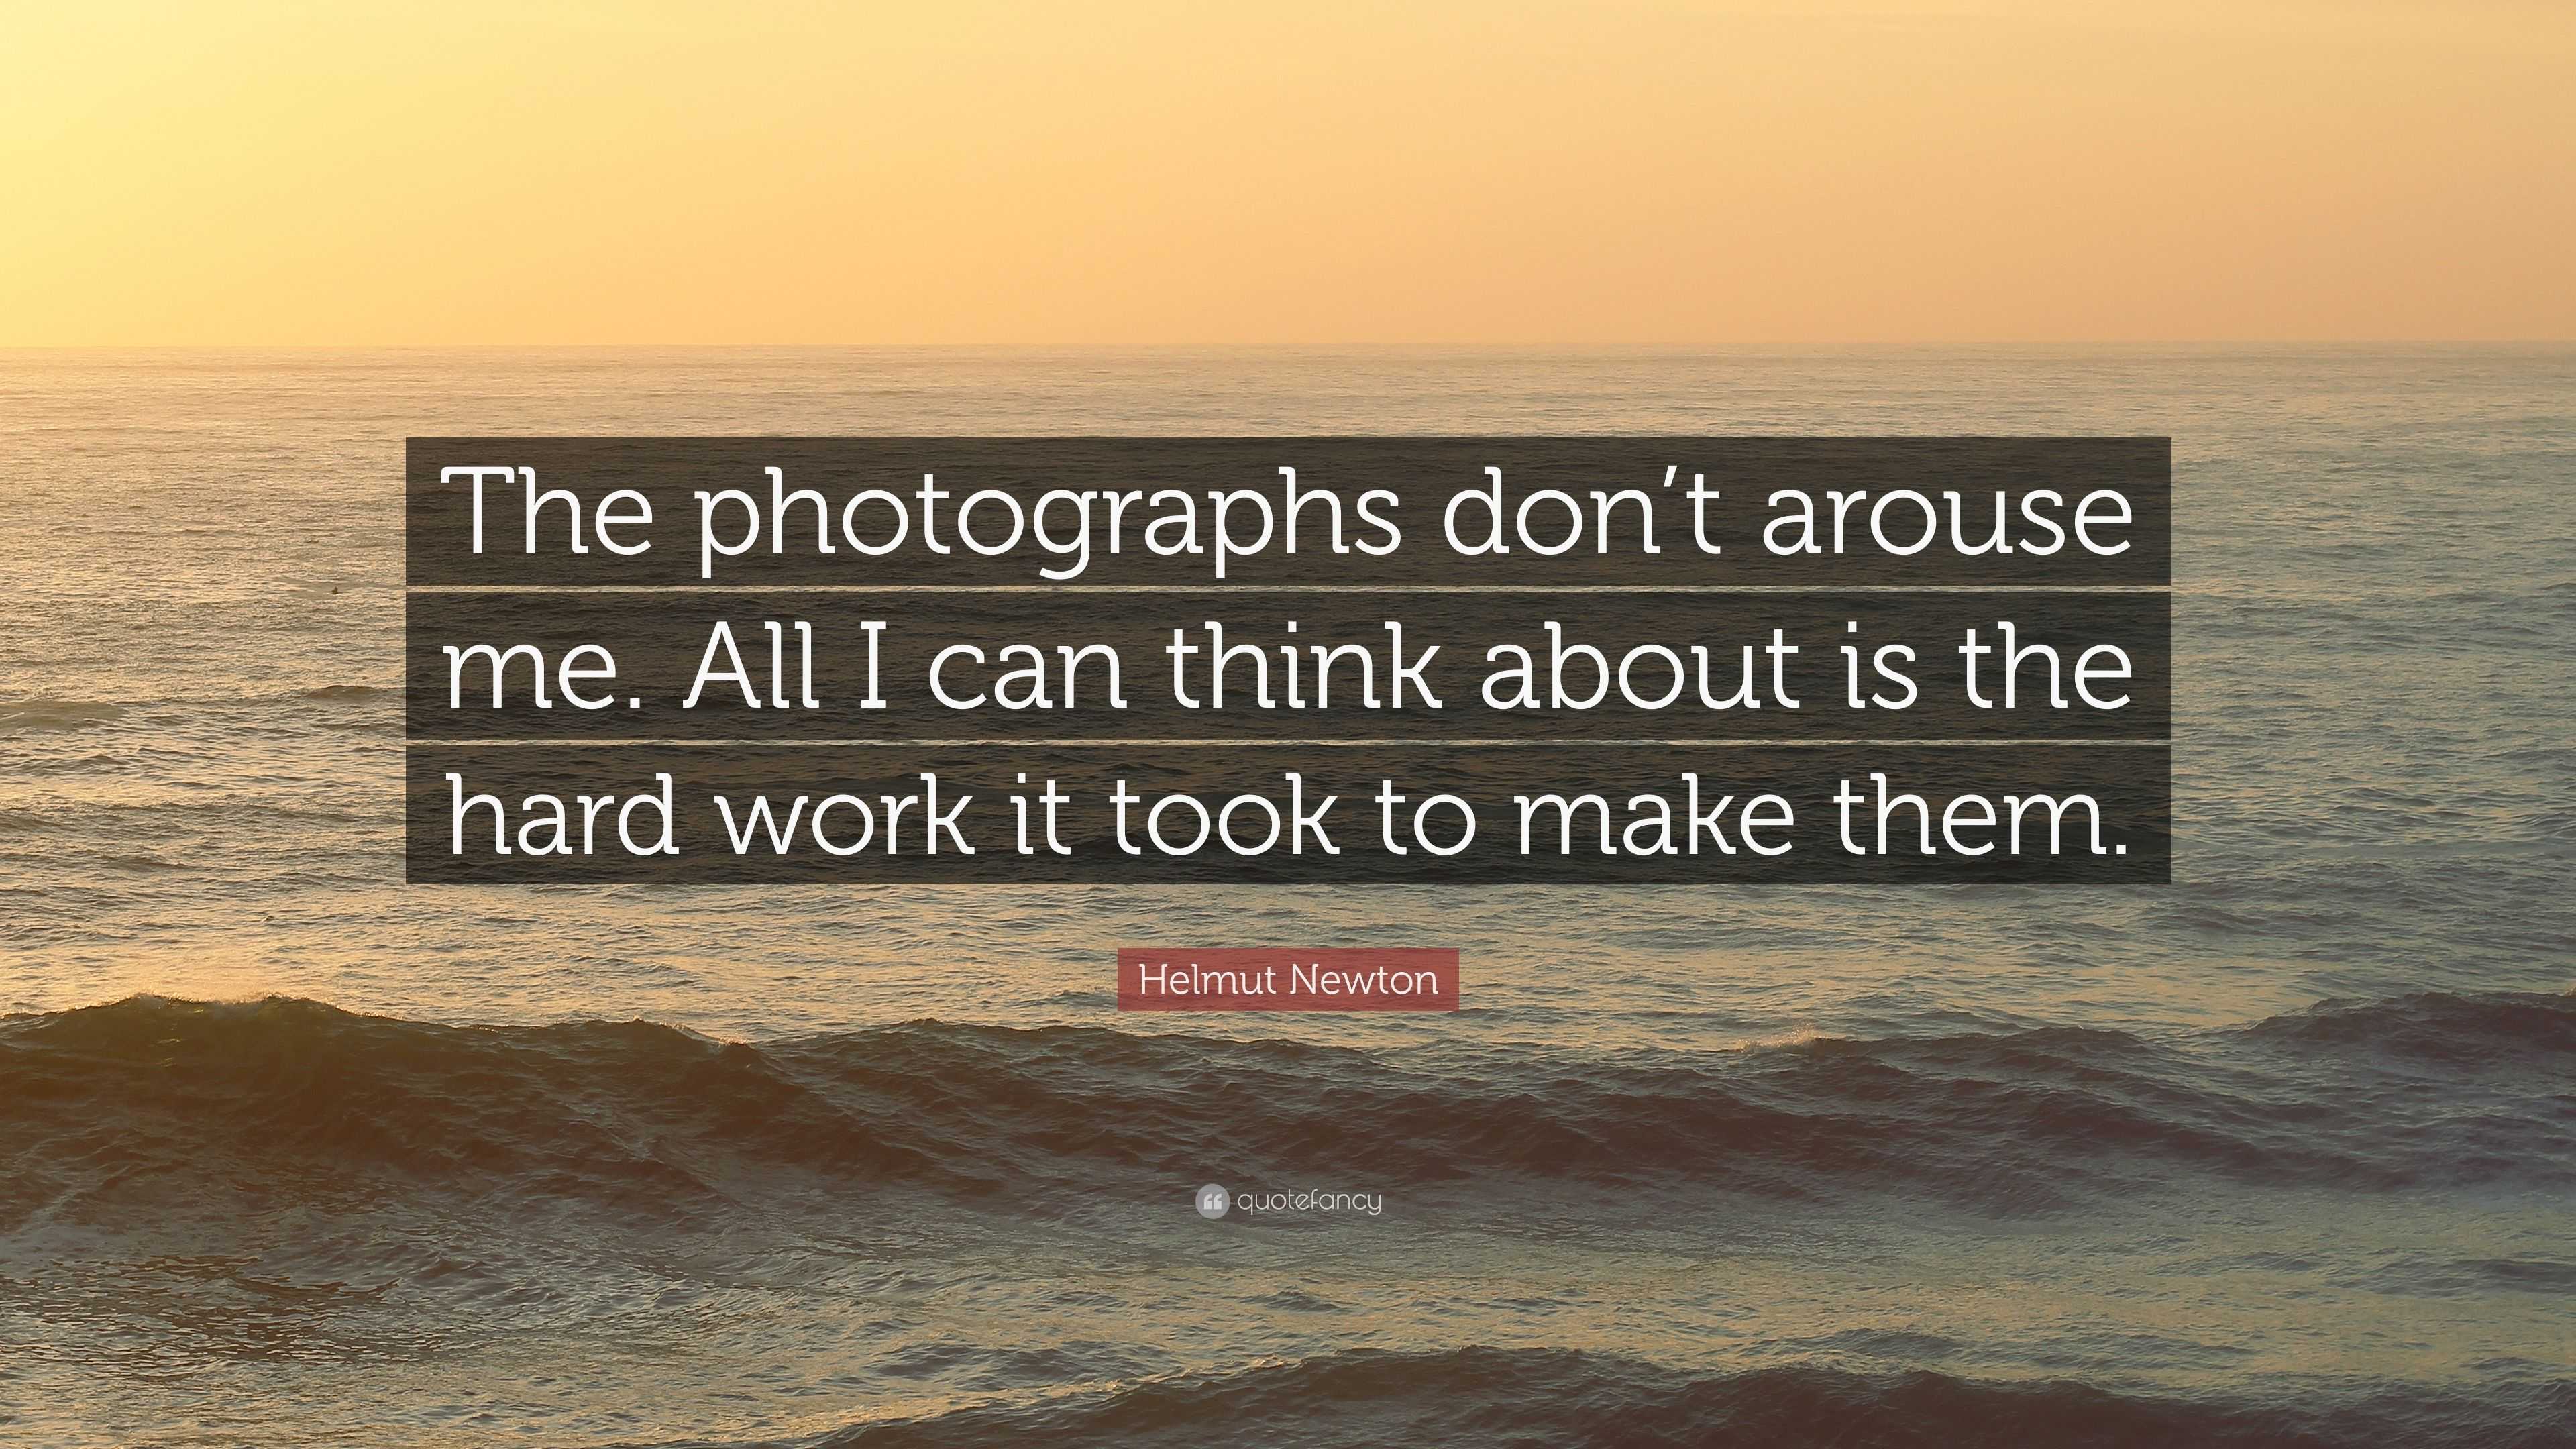 Helmut Newton Quote: “The photographs don’t arouse me. All I can think ...